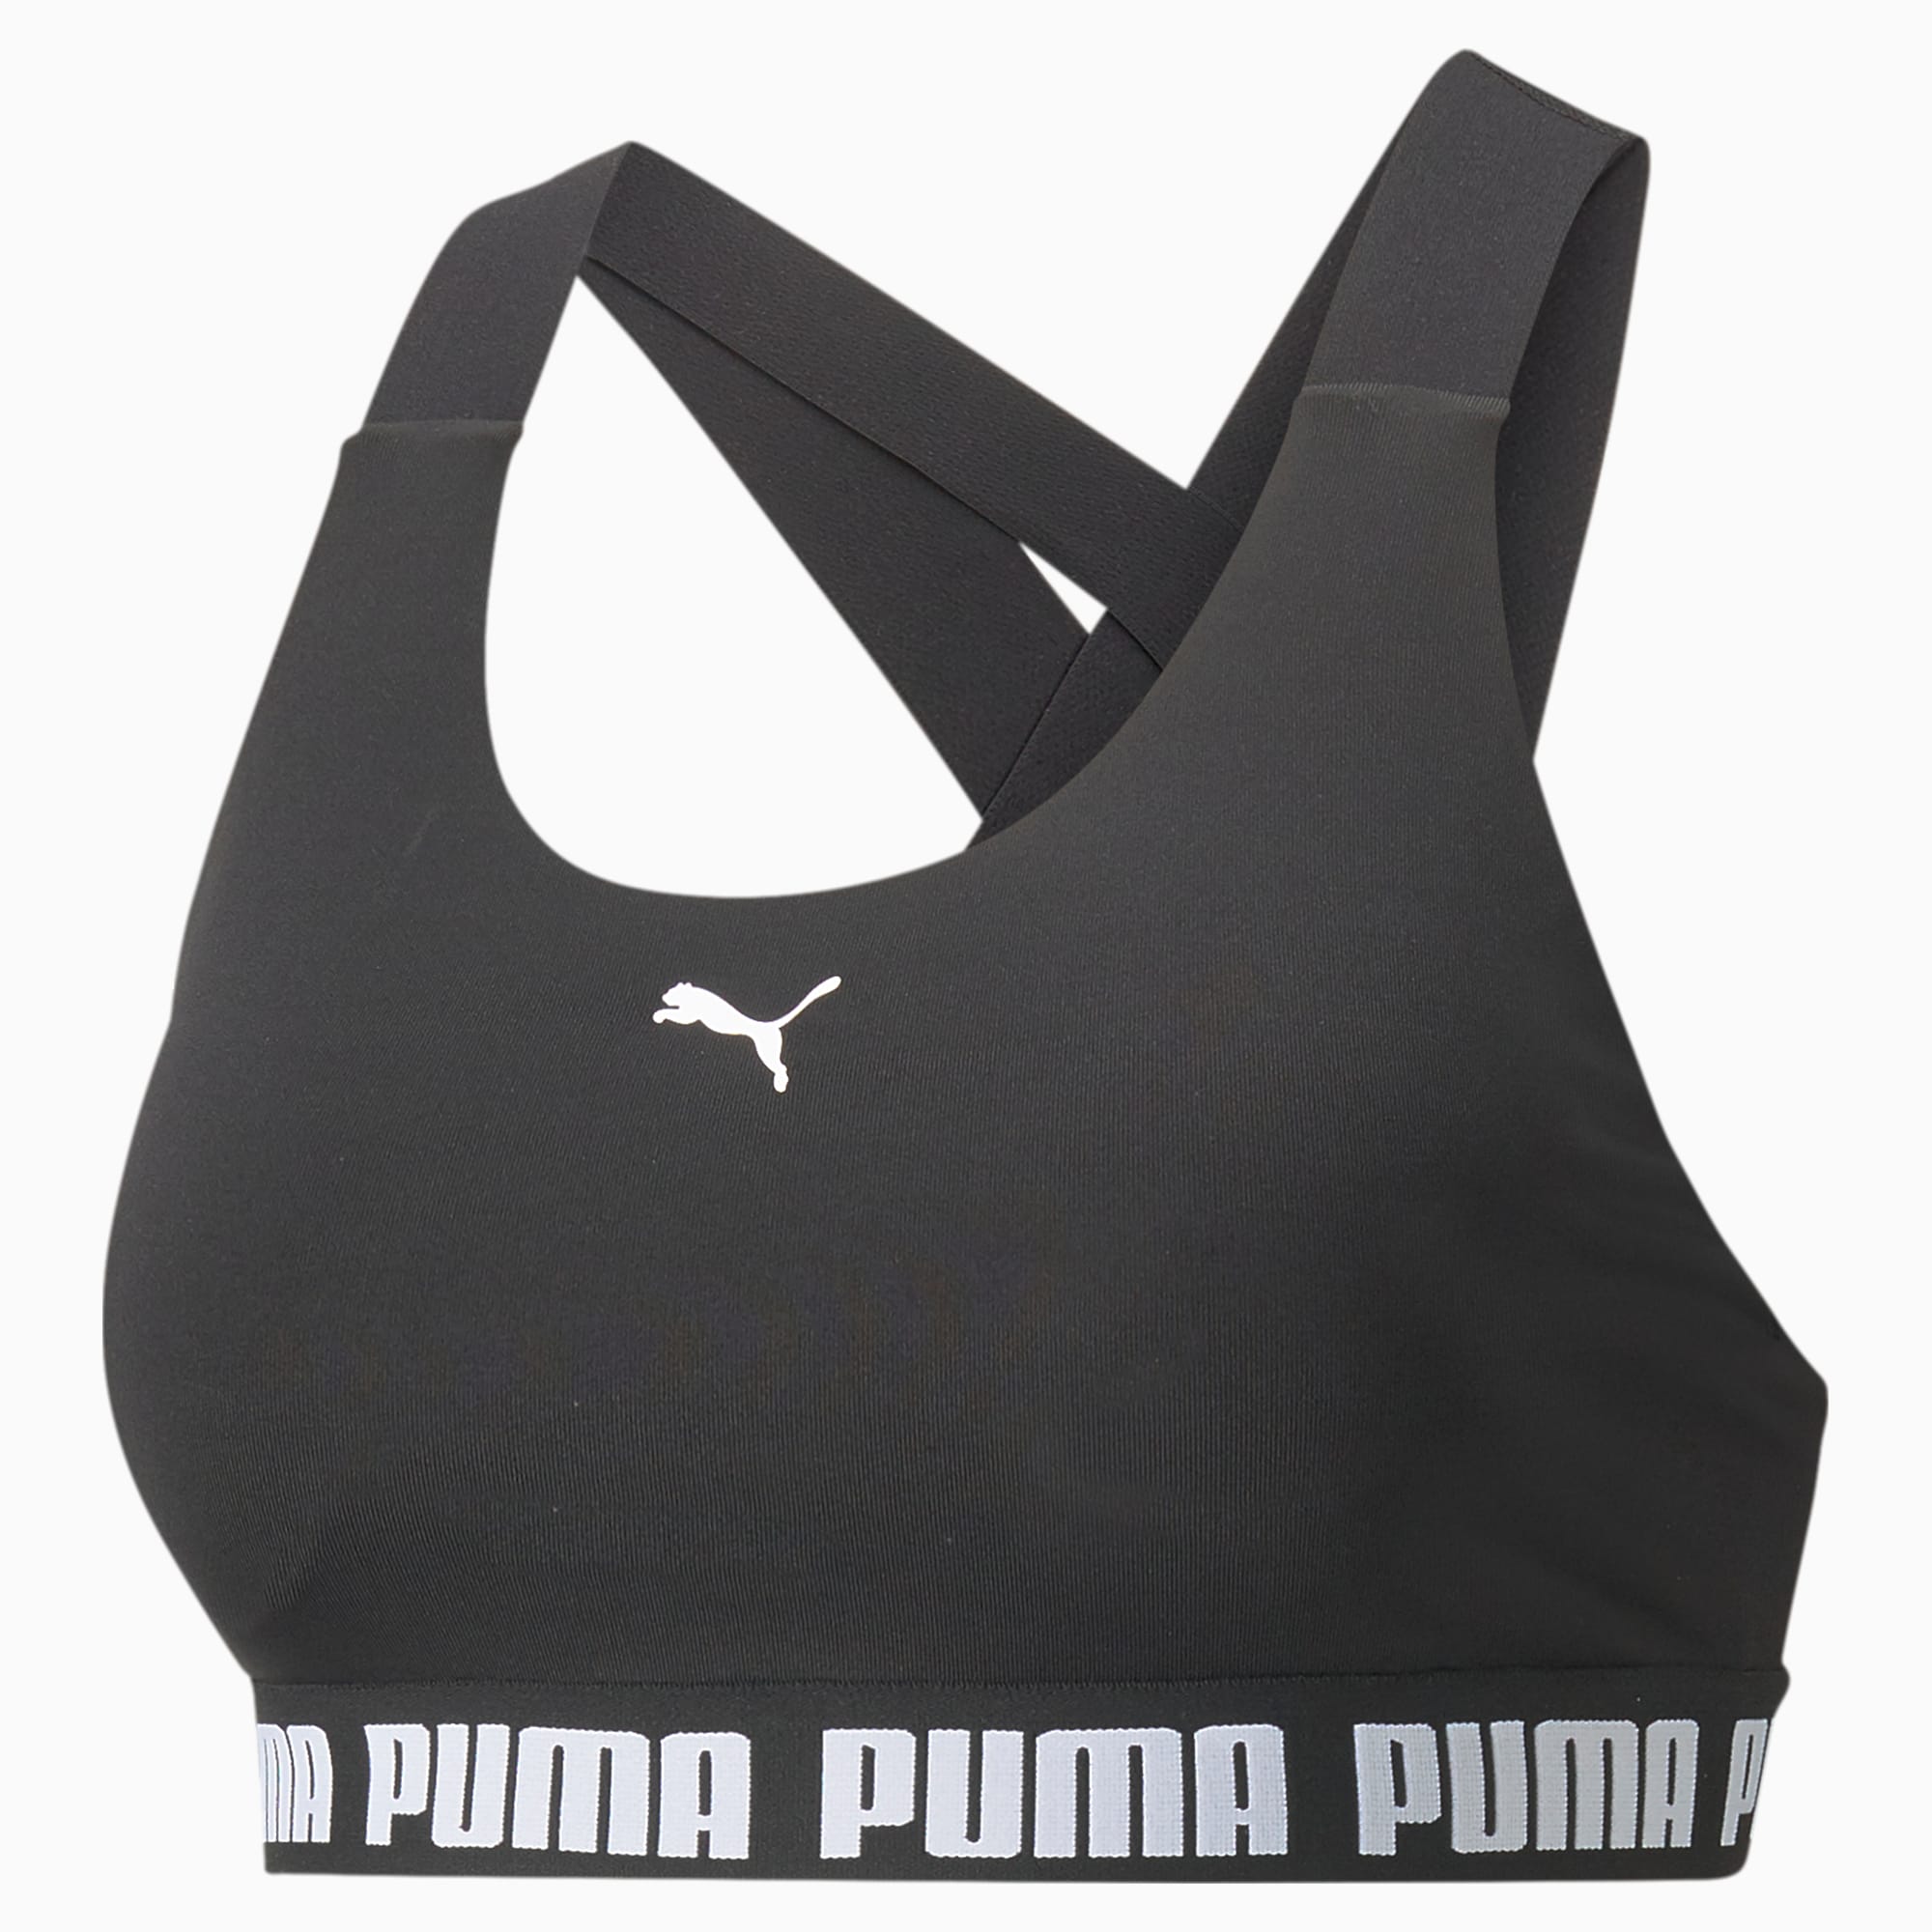 Bra PUMA Mid Elastic Padded Women's Training Bras for woman sports fitness  without bones top пума